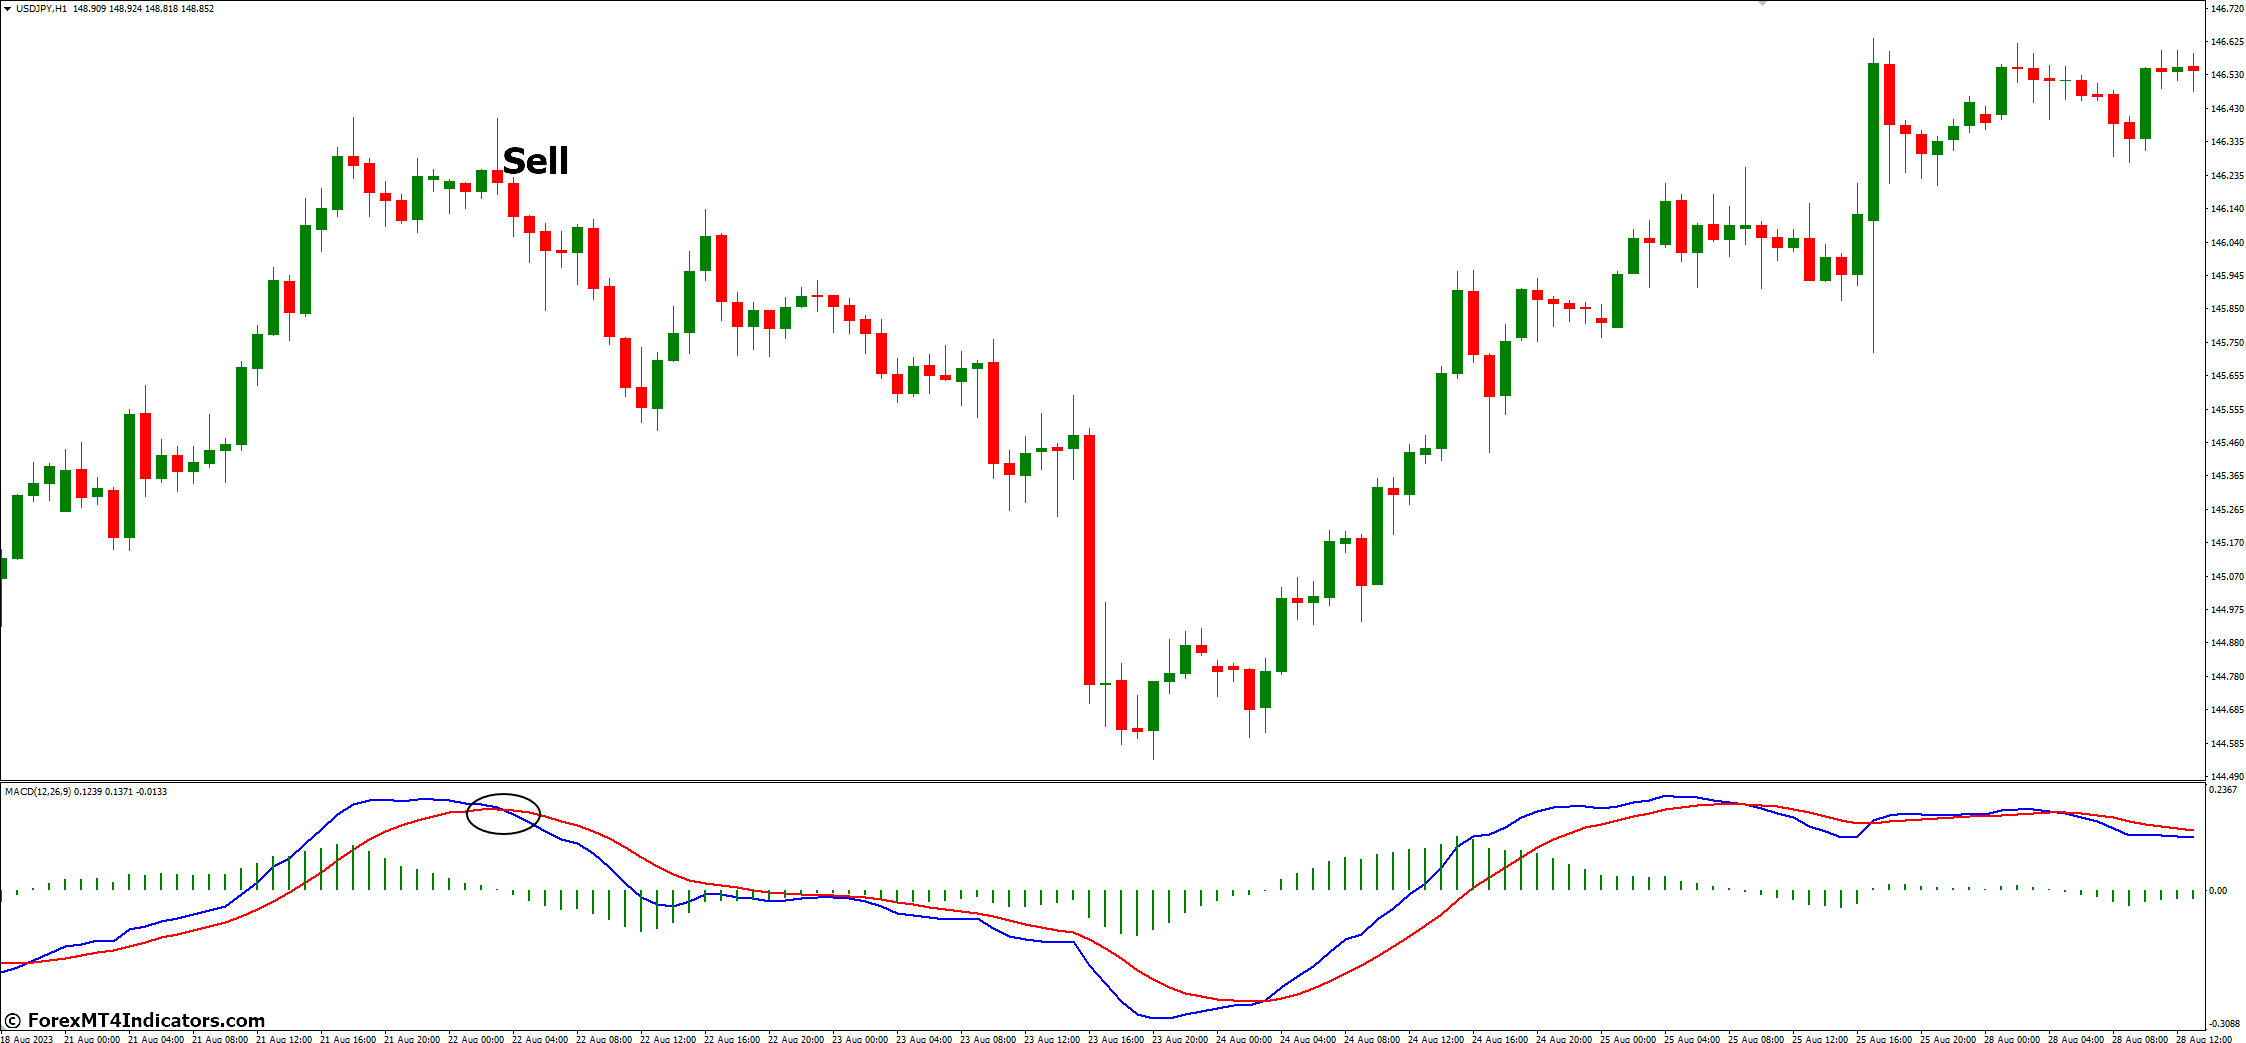 How to Spot Buy and Sell Signals with MACD - Bearish Signals